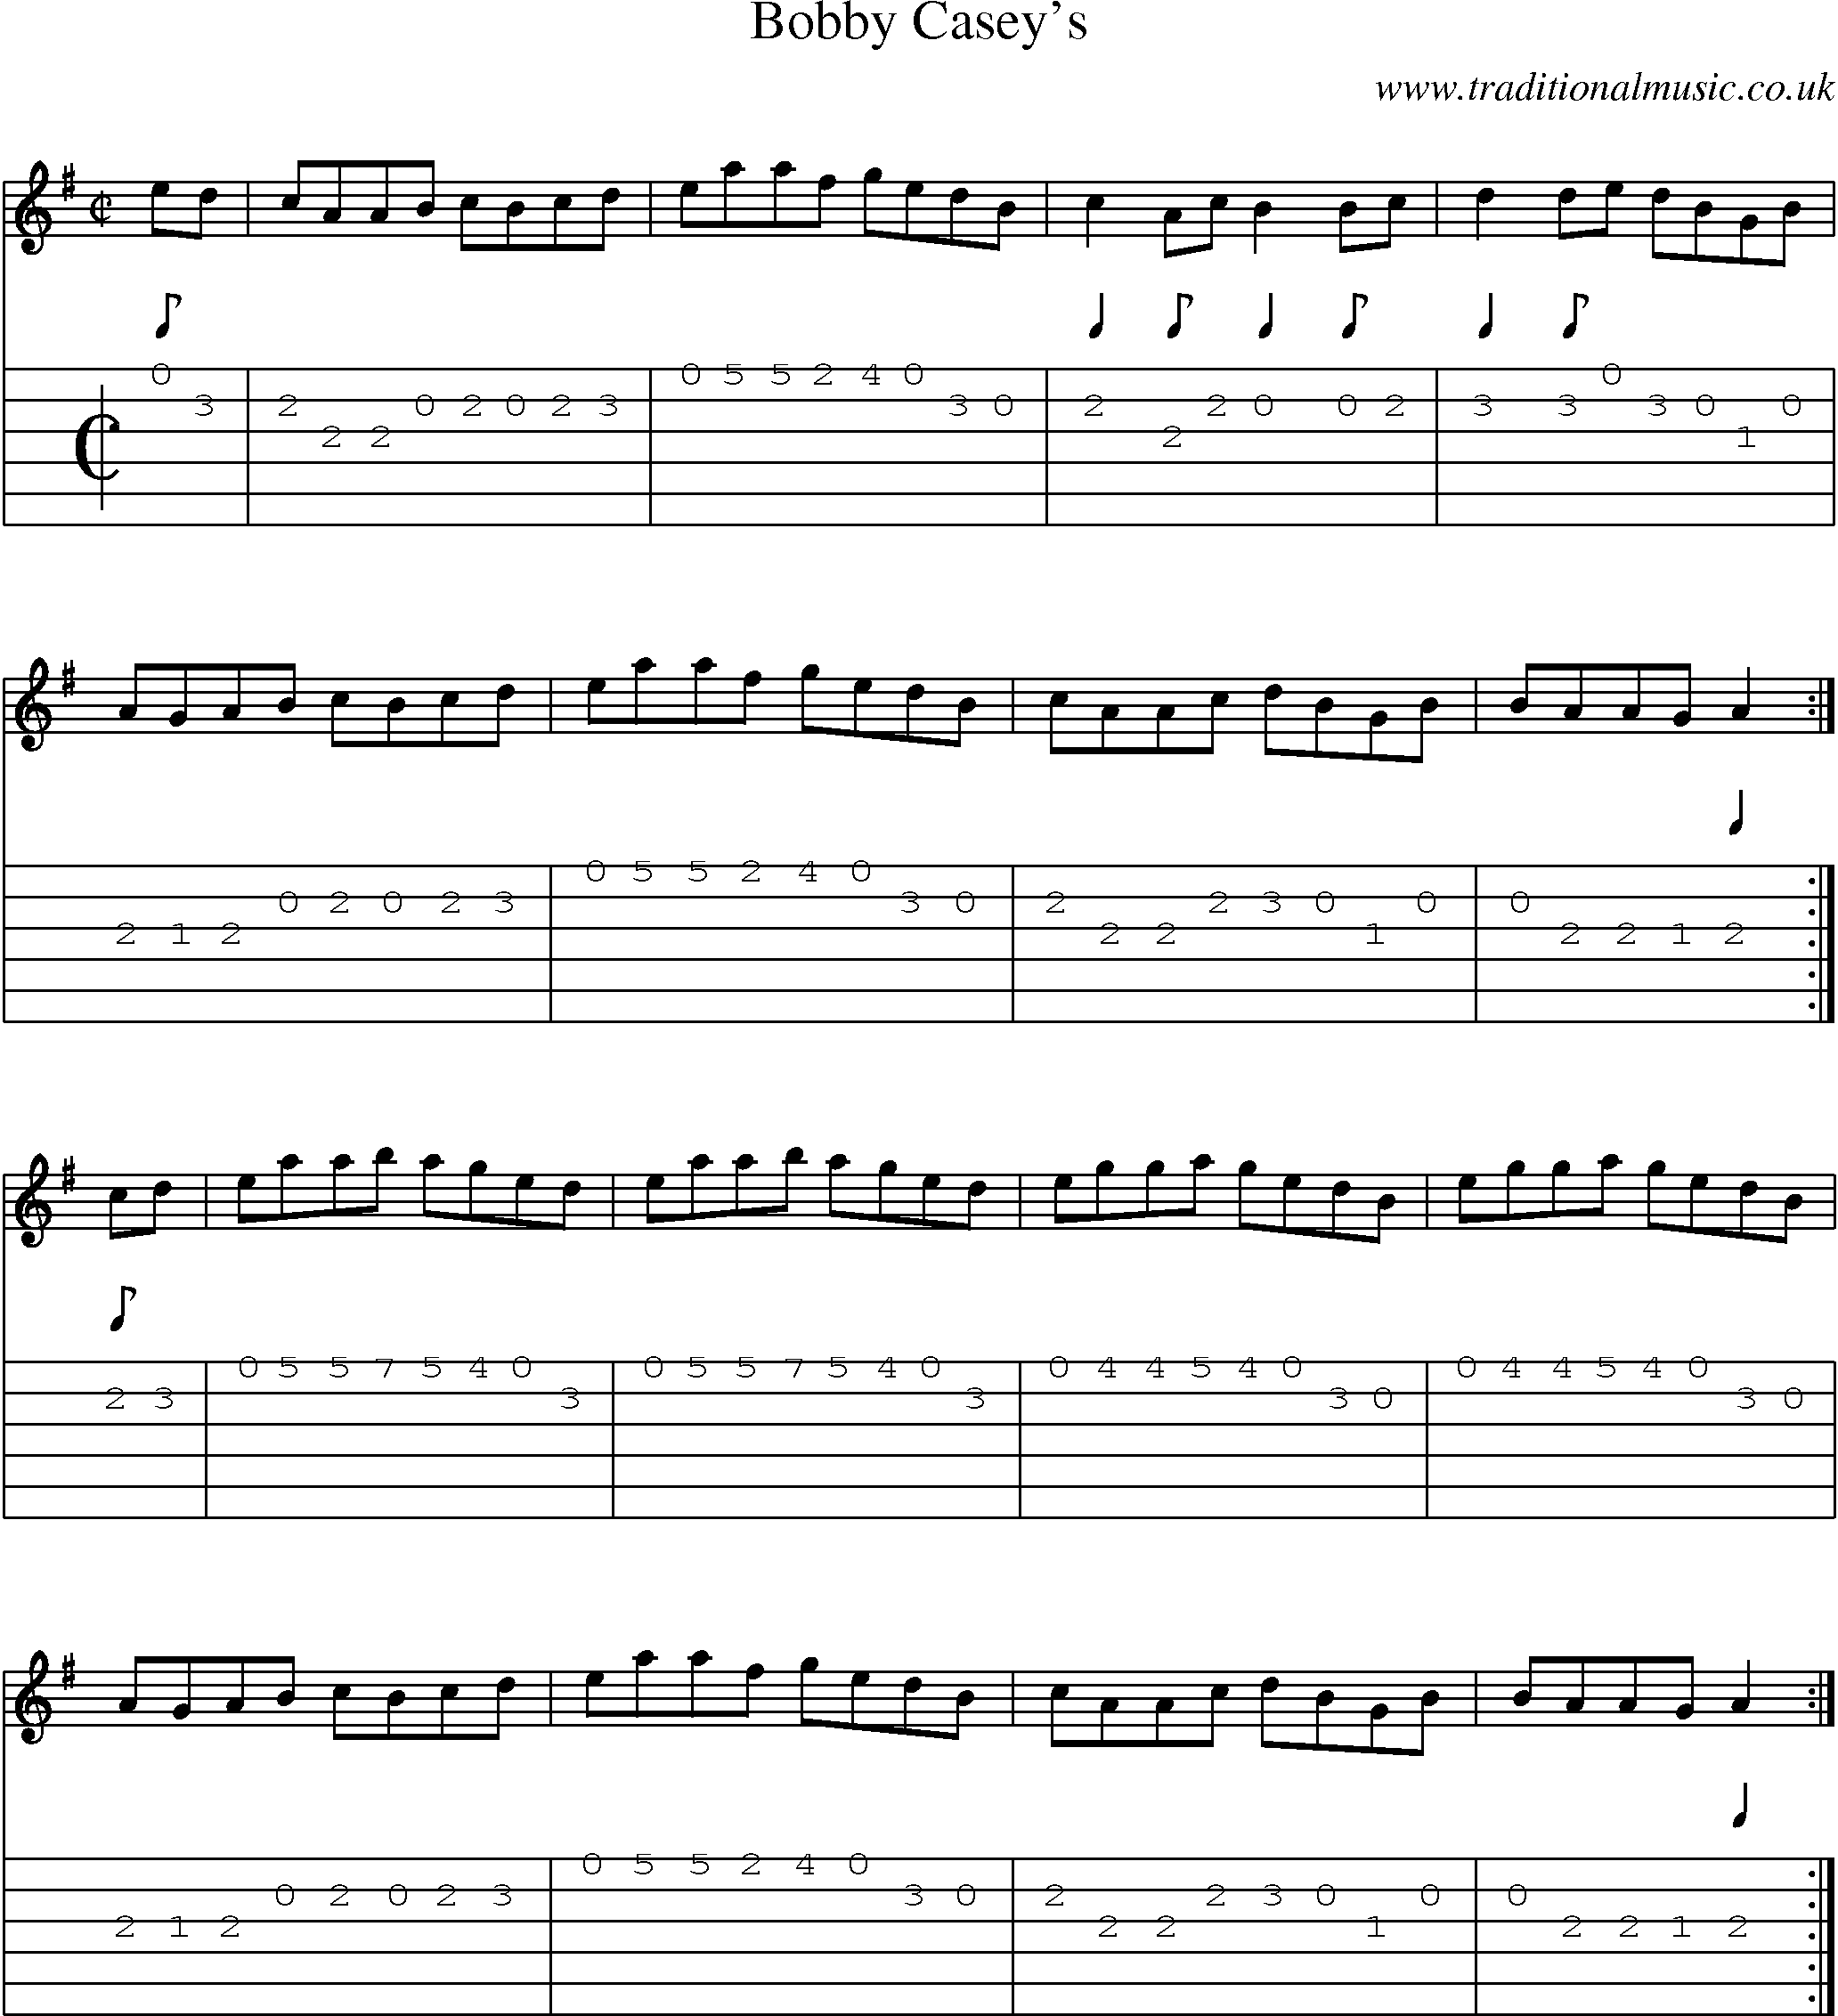 Music Score and Guitar Tabs for Bobby Caseys